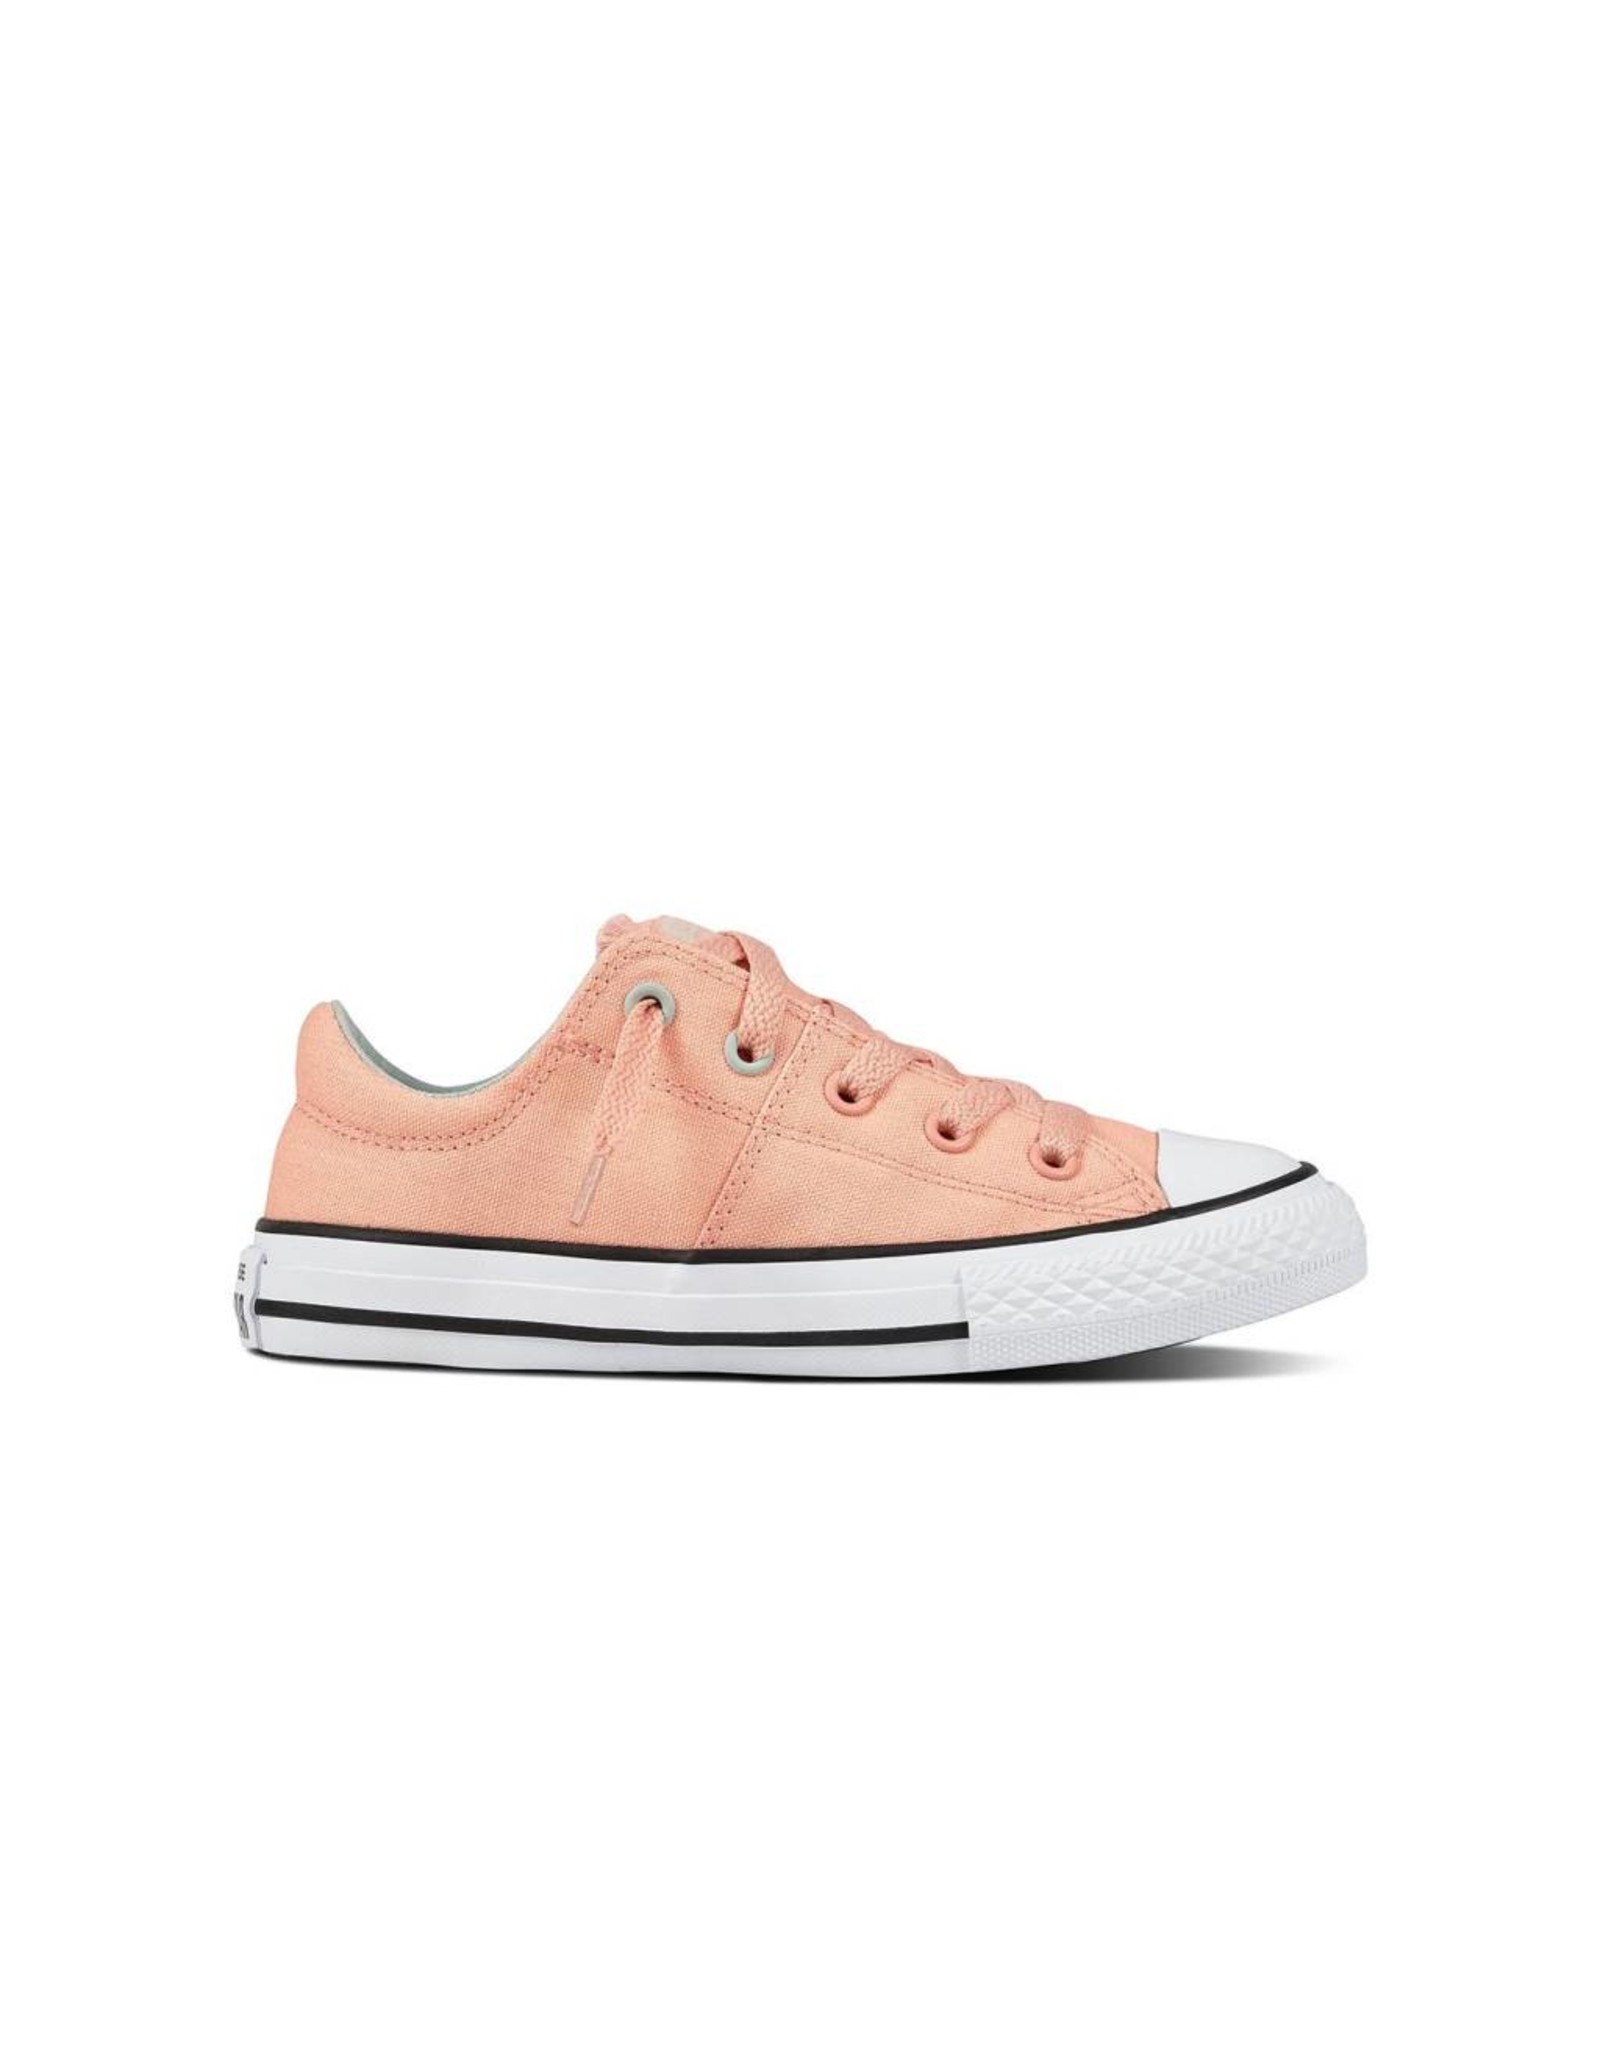 CONVERSE CHUCK TAYLOR MADISON OX PALE CORAL/DRIED BAMBOO CYMAP-659952C